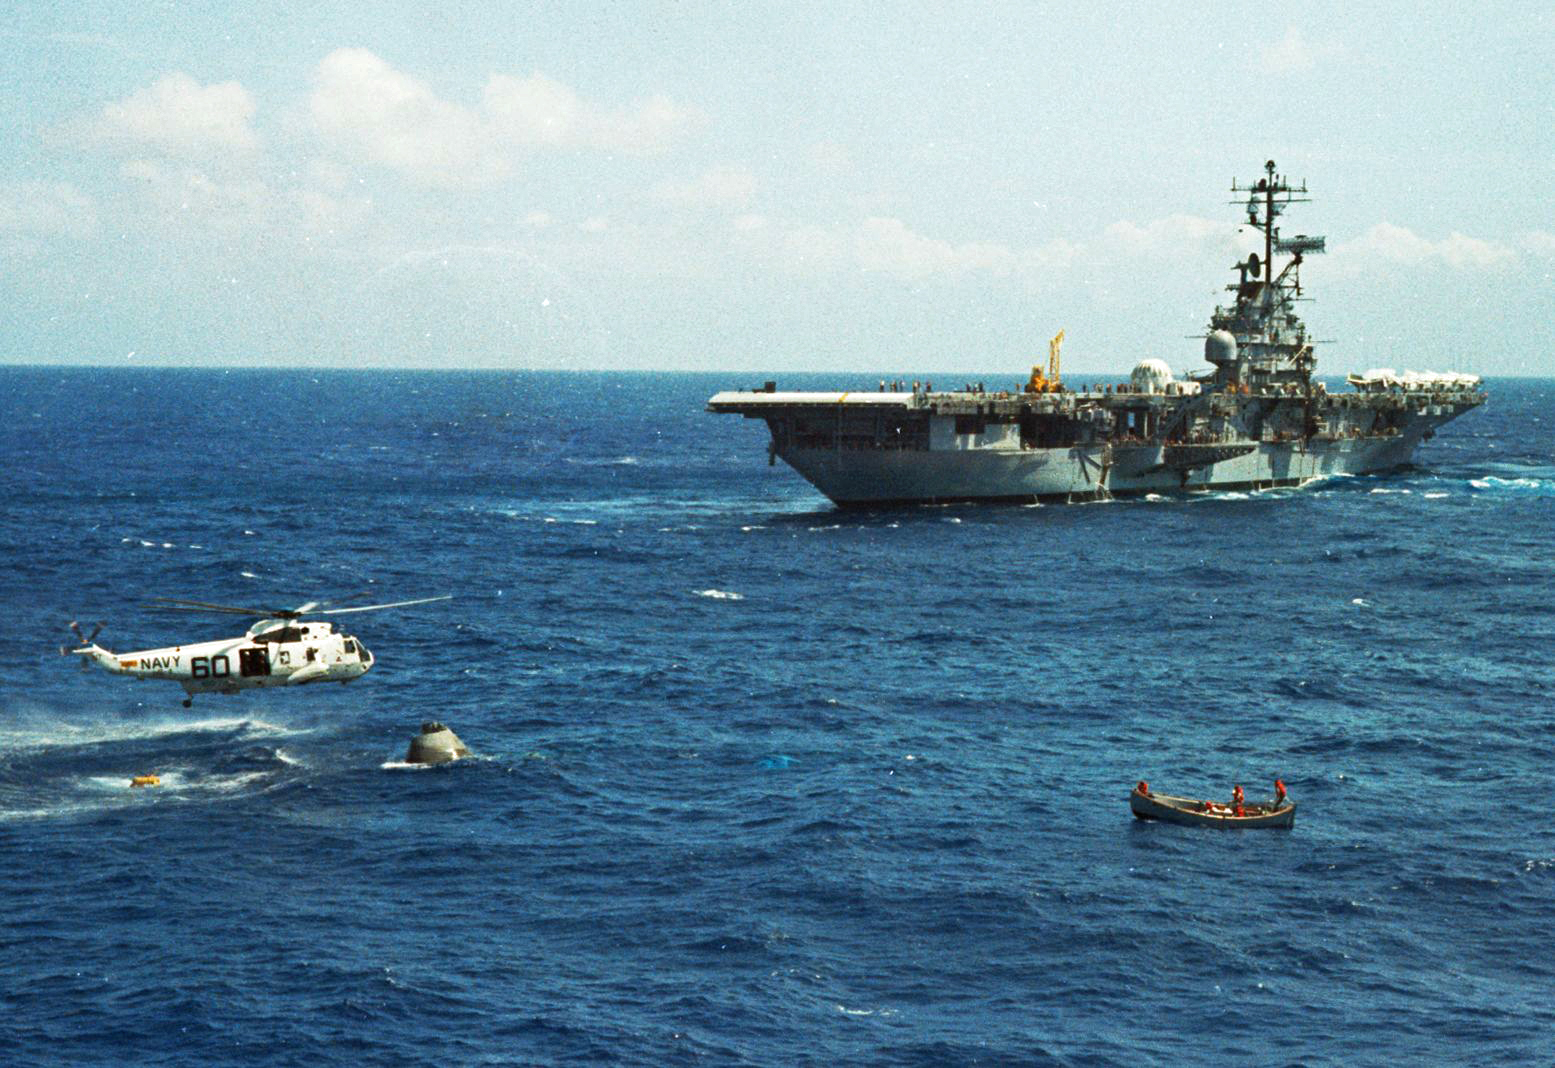 Crews from the U.S.S. Hornet practice recovery operations